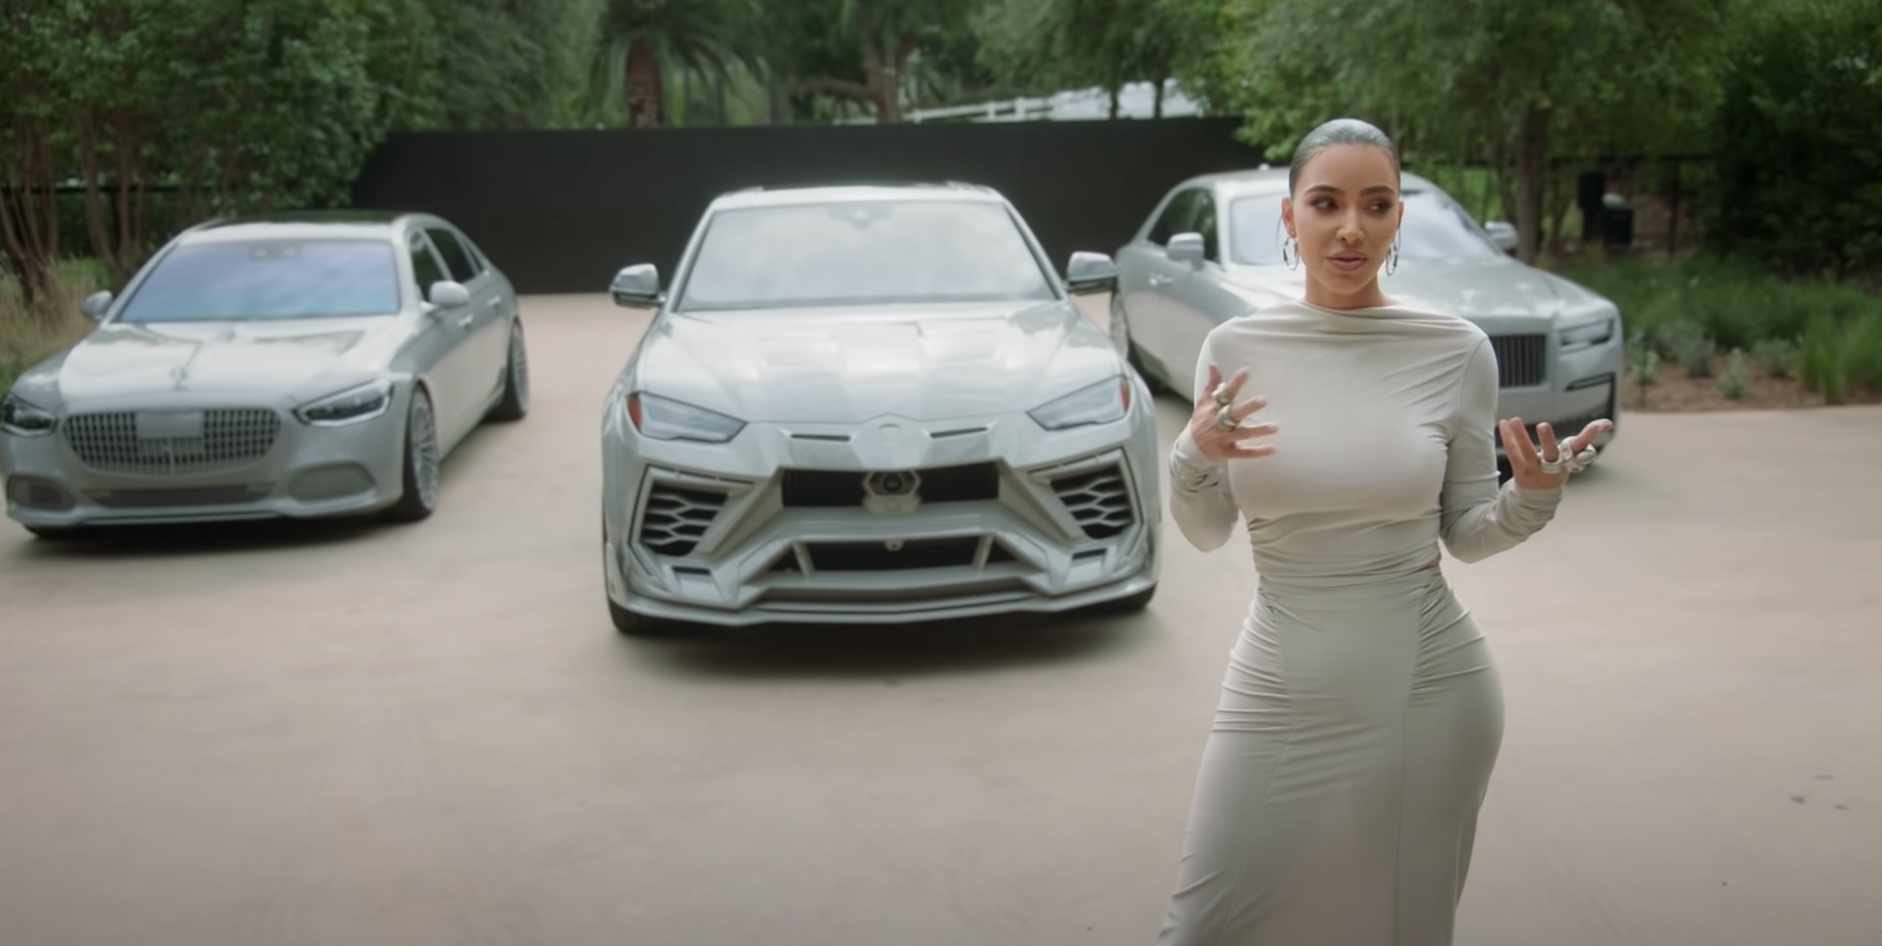 Kim standing in front of her three grey cars